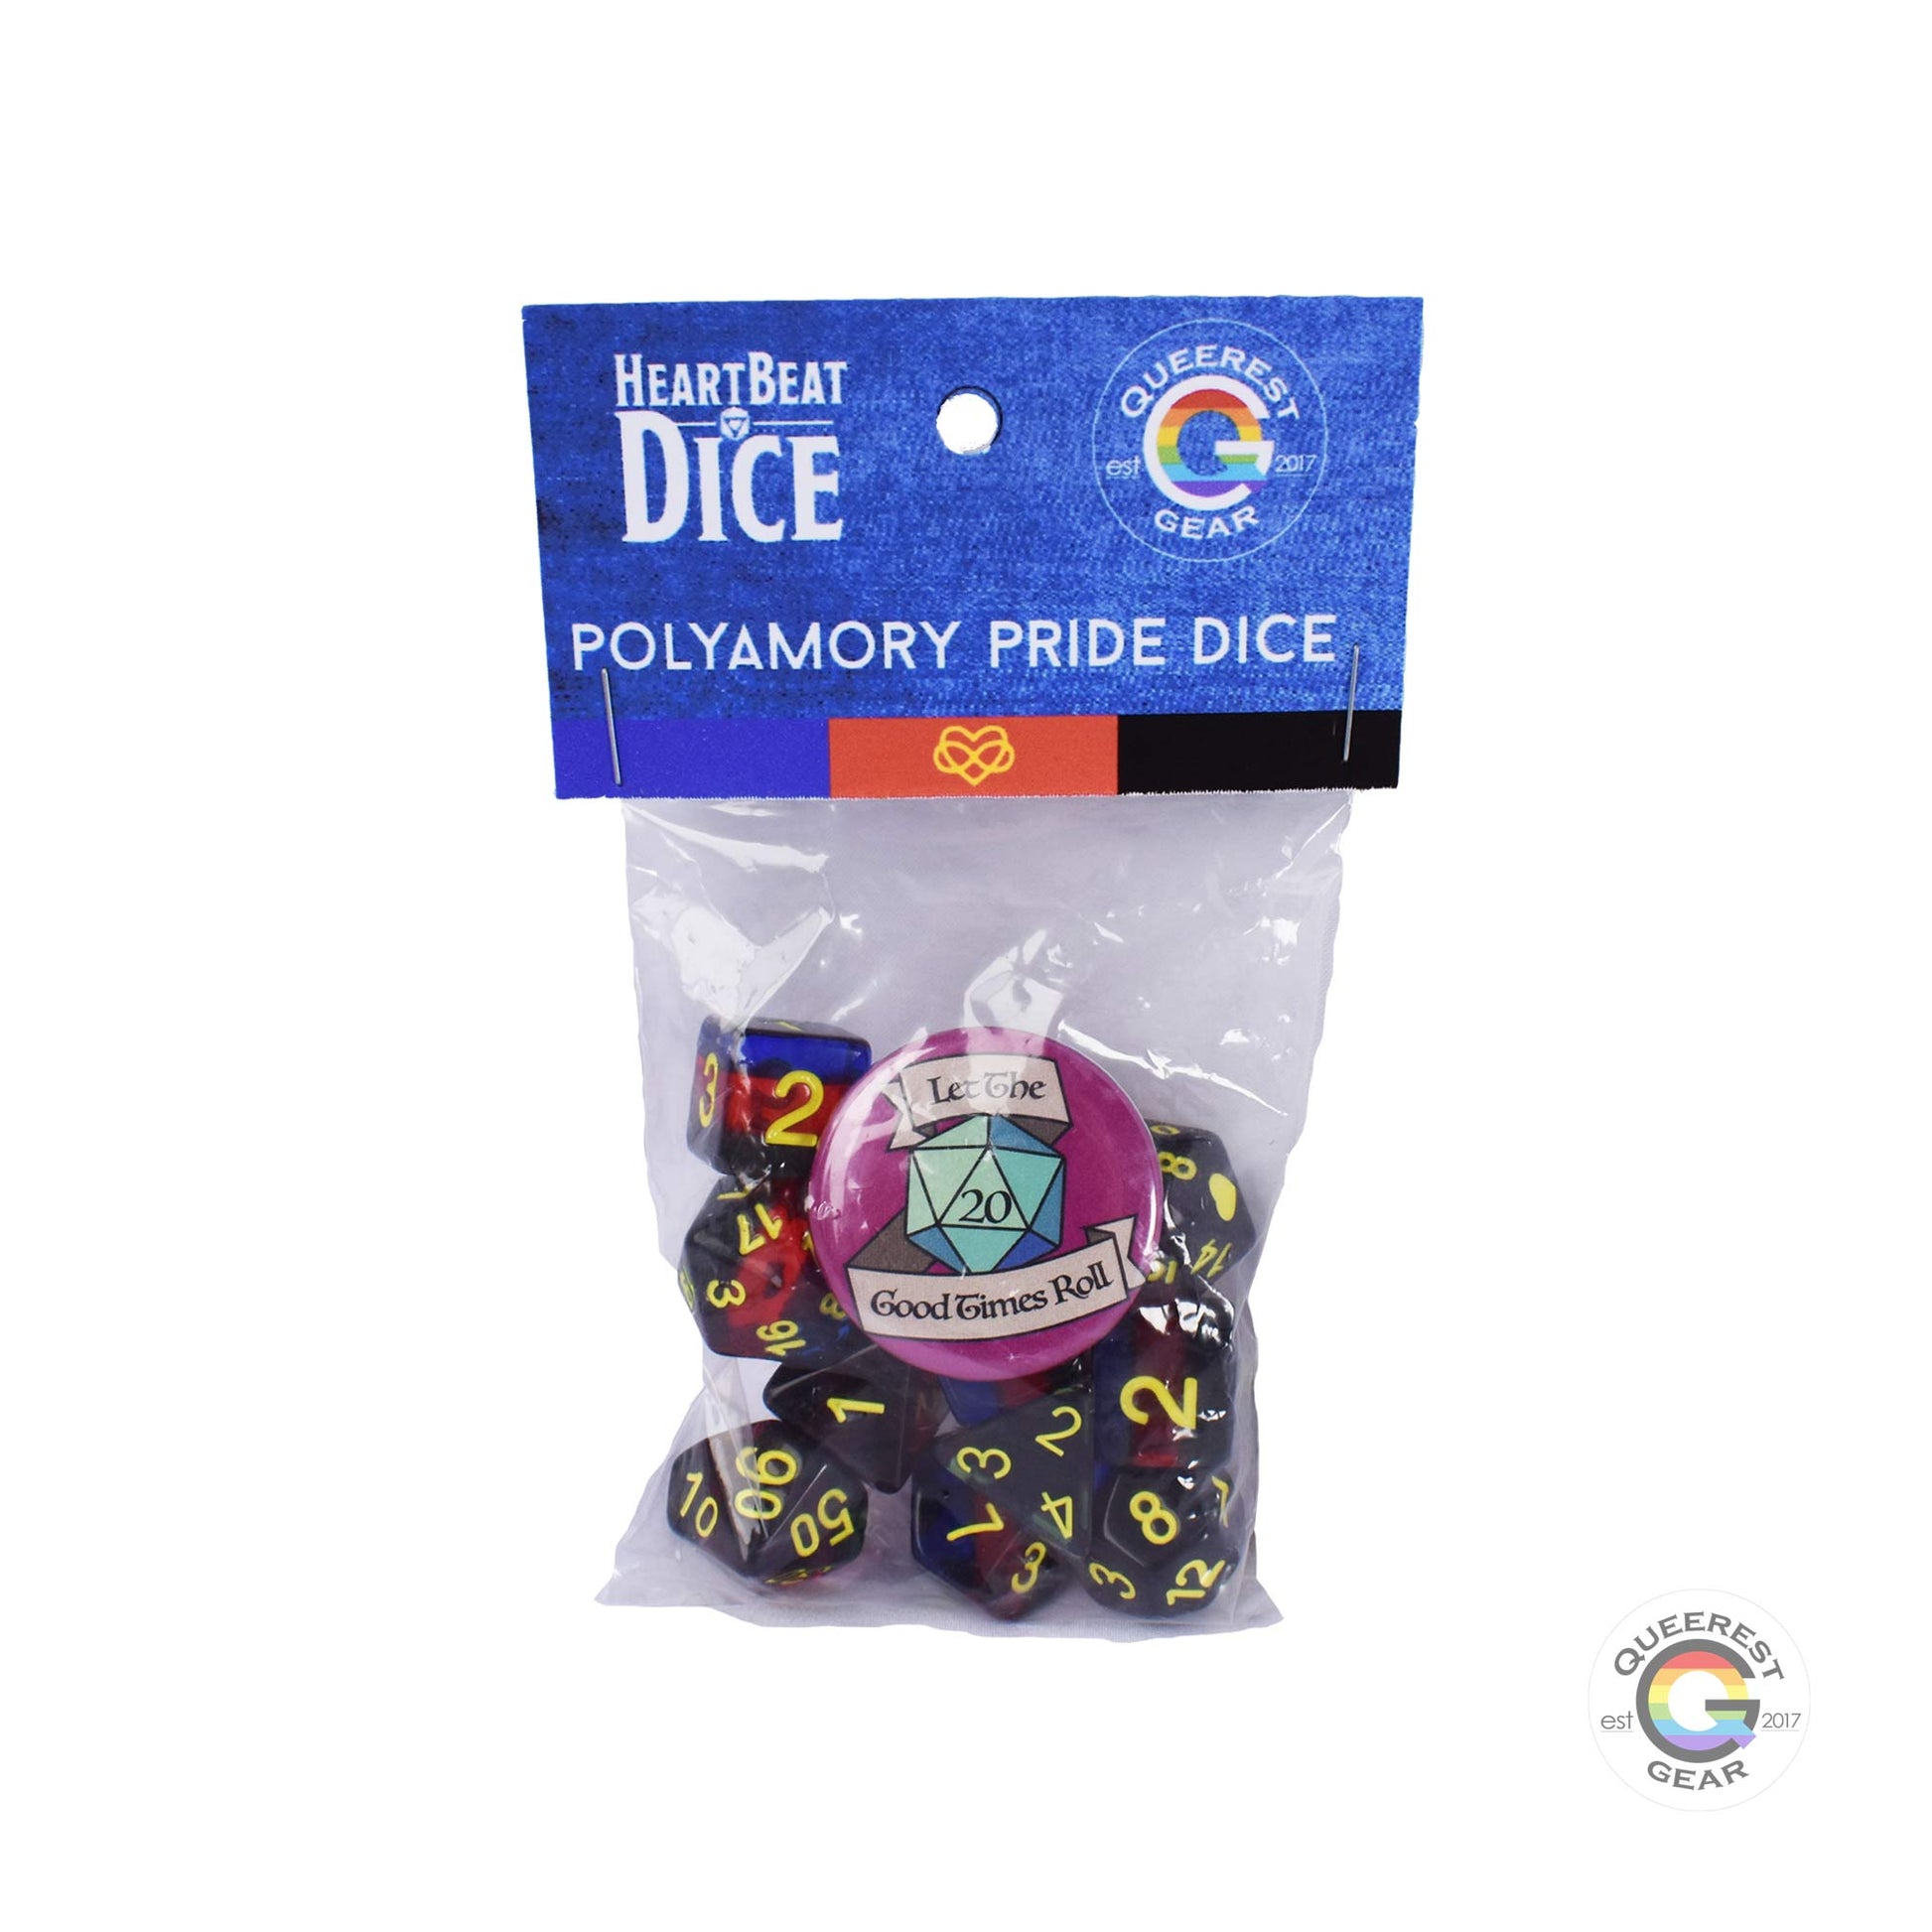 Polyamory pride dice in their packaging with a free “let the good times roll” button